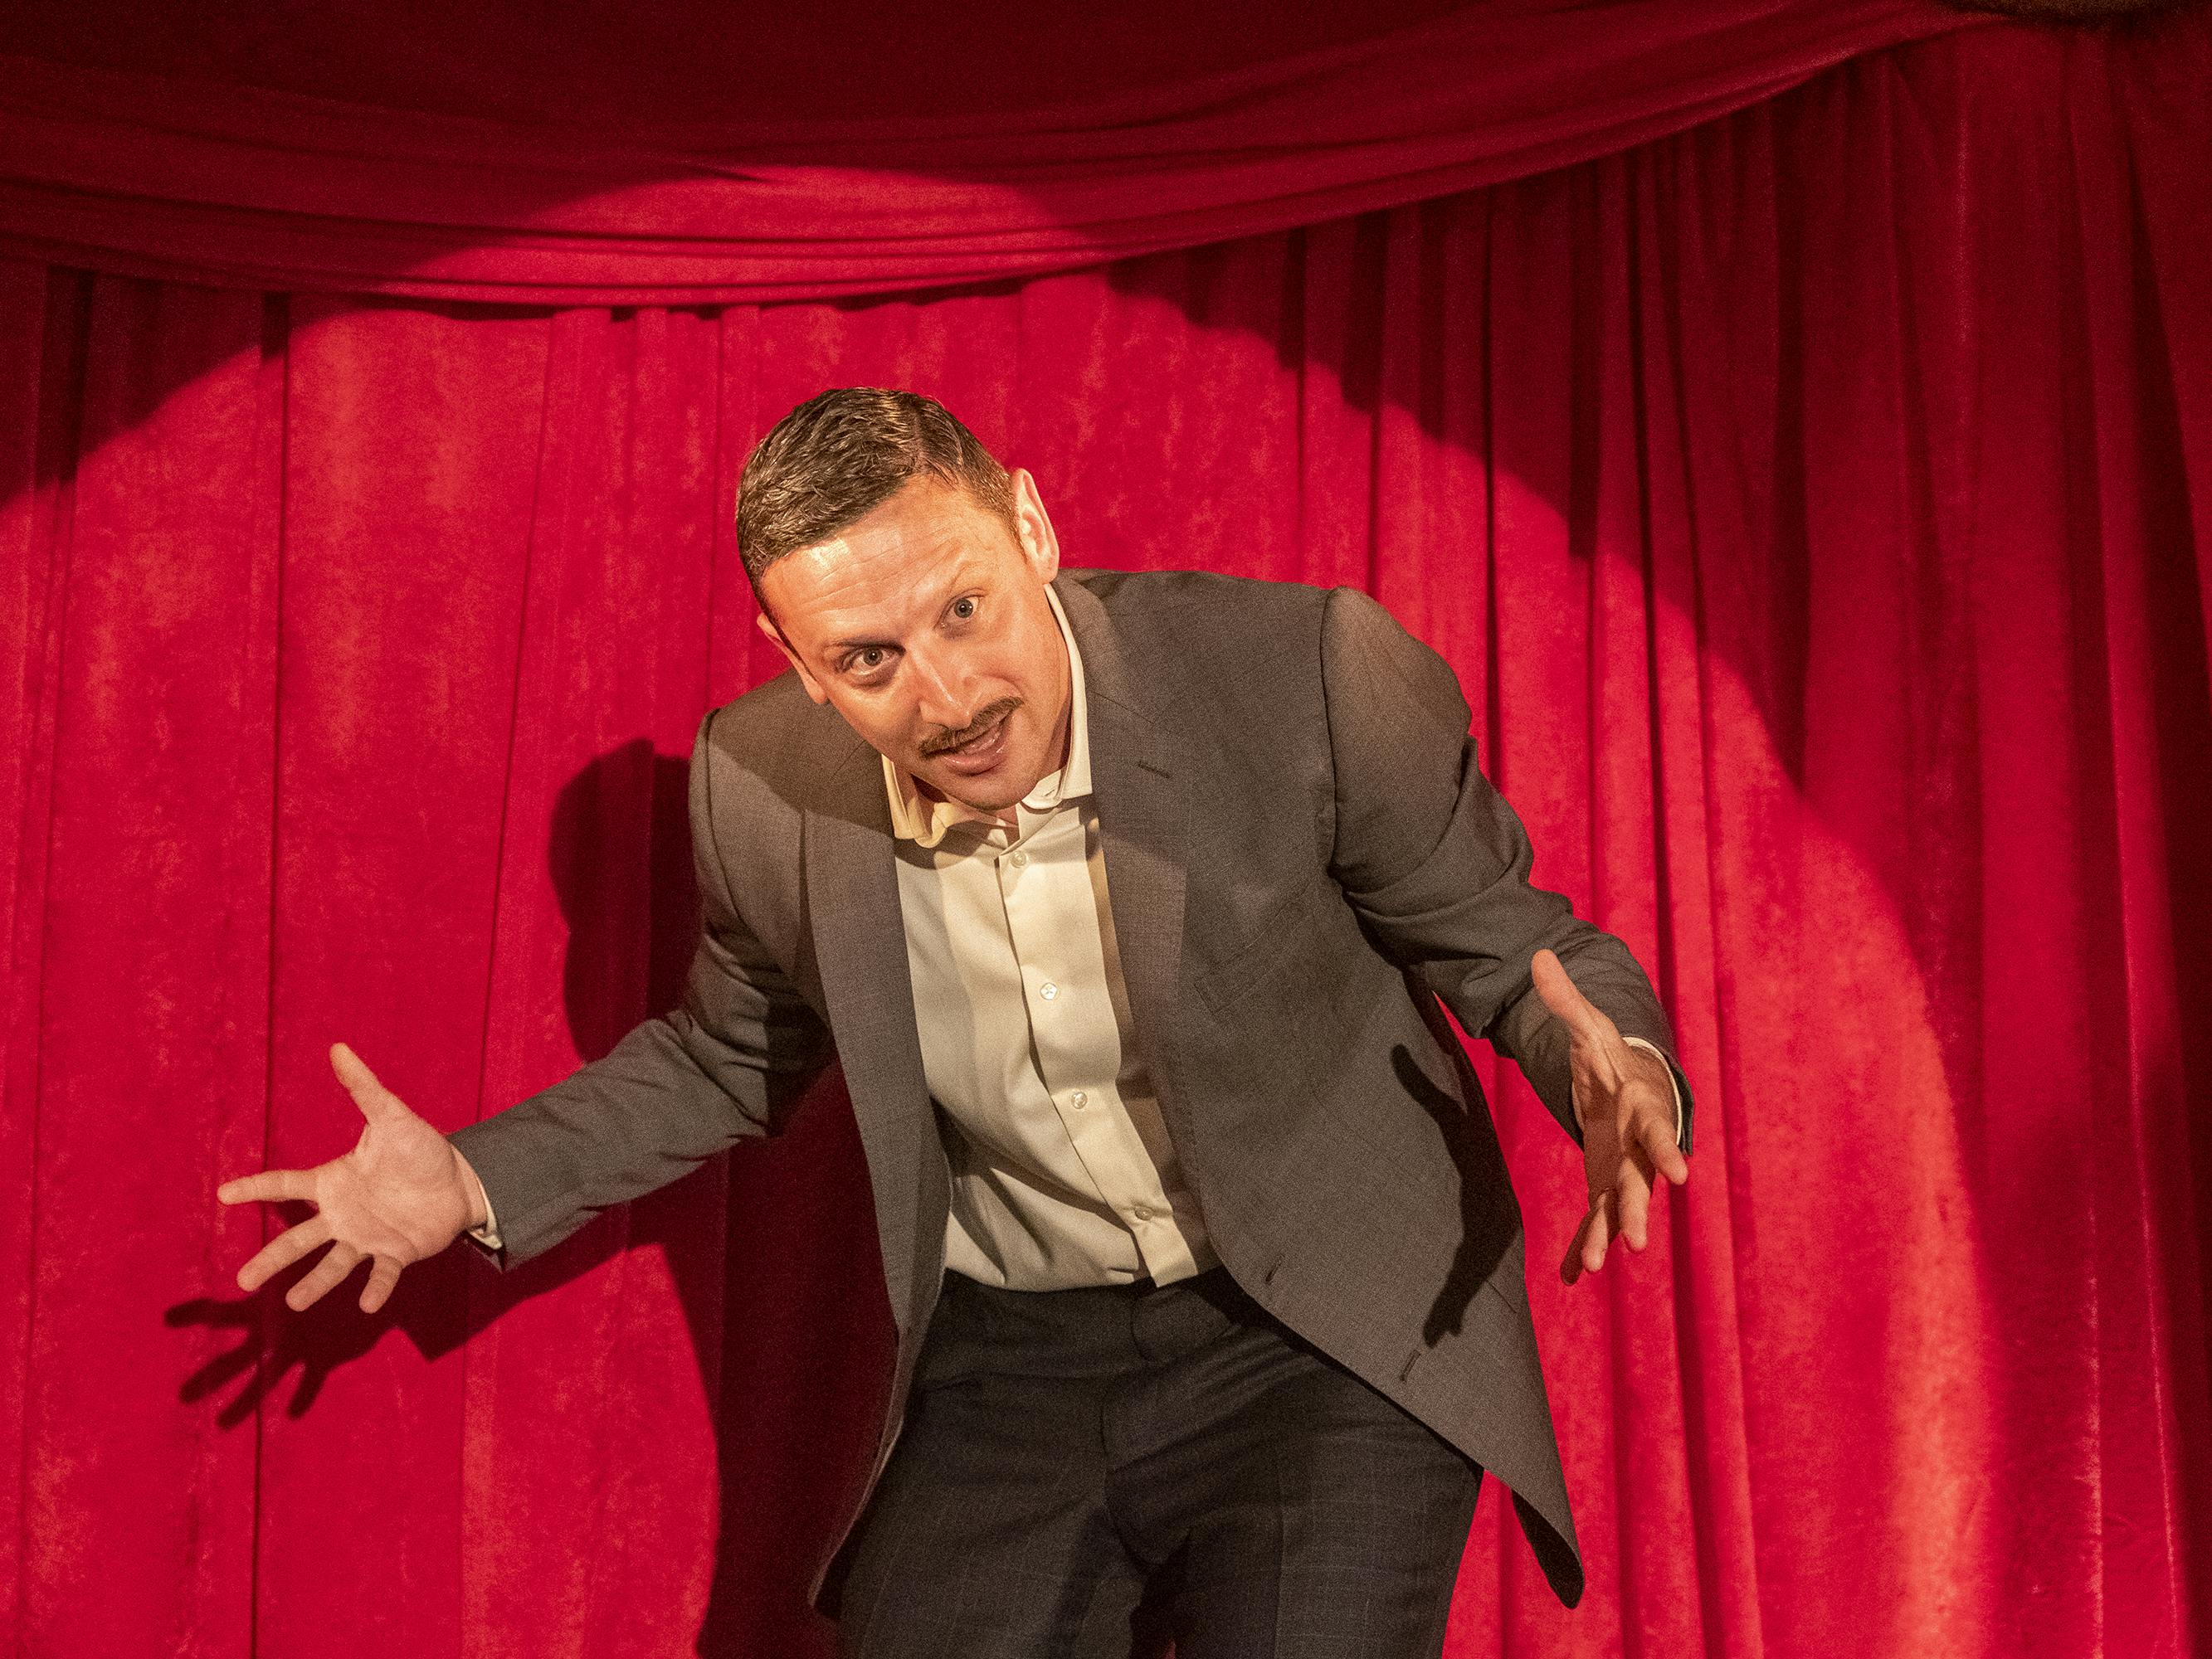 Tim Robinson stands in the spotlight against a red velvet curtain.